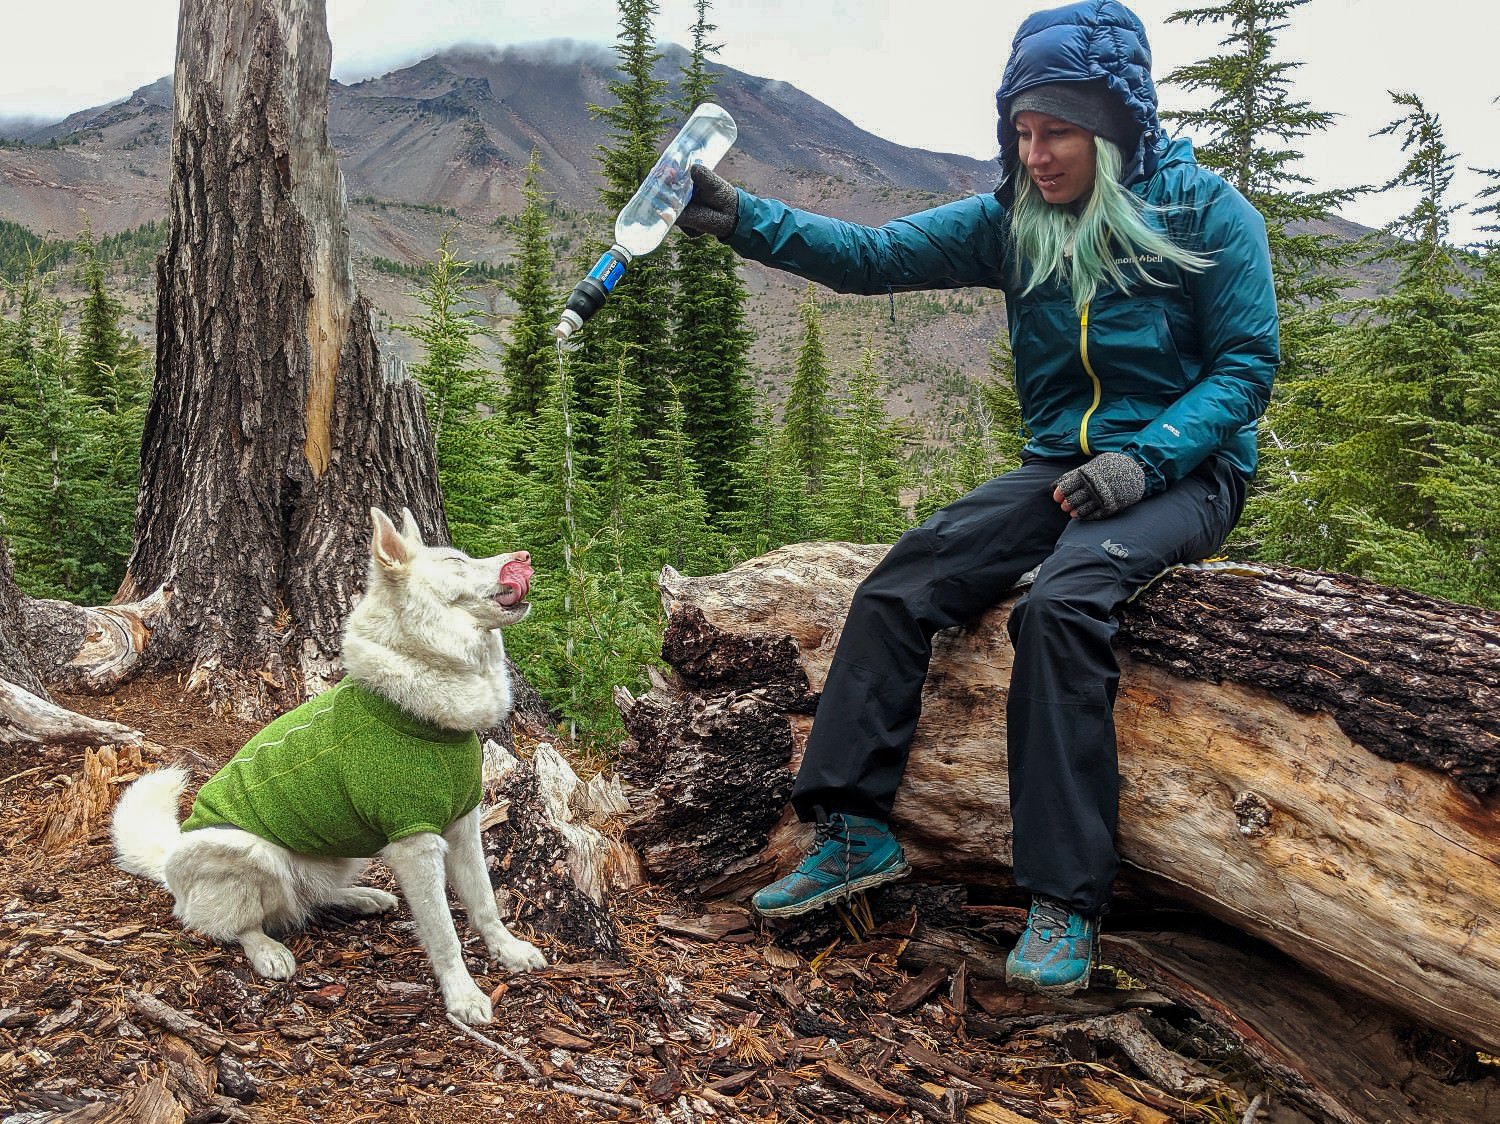 A hiker giving a dog water with her Sawyer Squeeze Water Filter